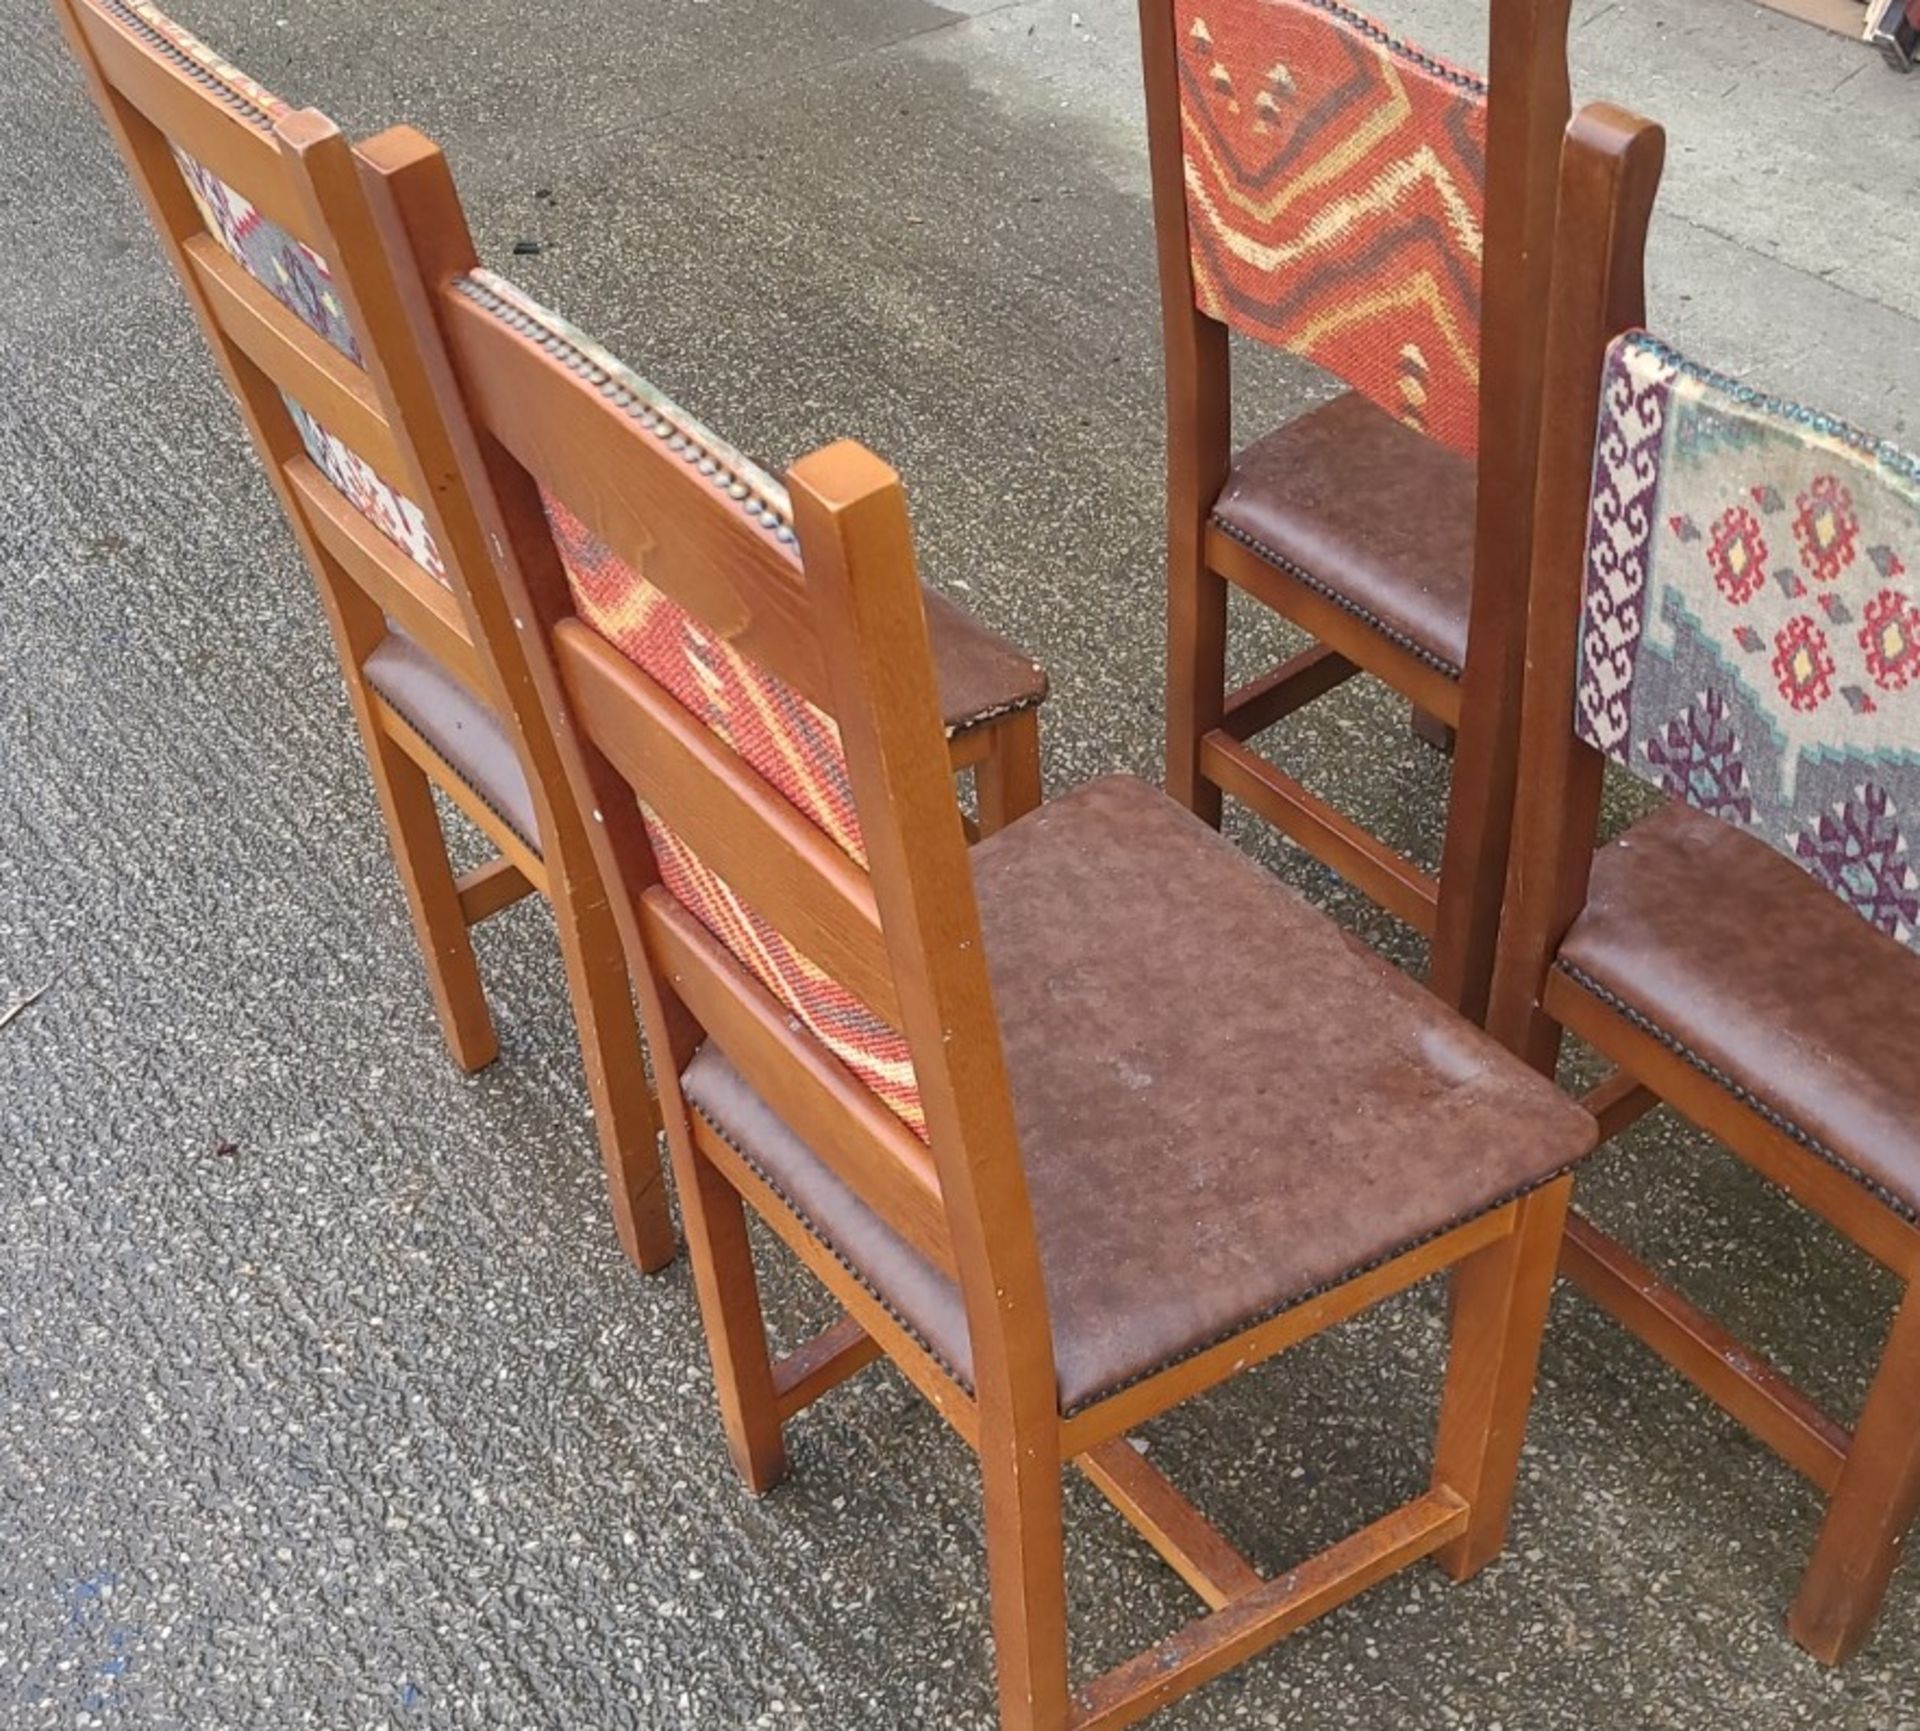 Set Of 4 x Aztec Print Dining Chairs With Faux Brown Leather Seating & Studded Seams - Image 4 of 6